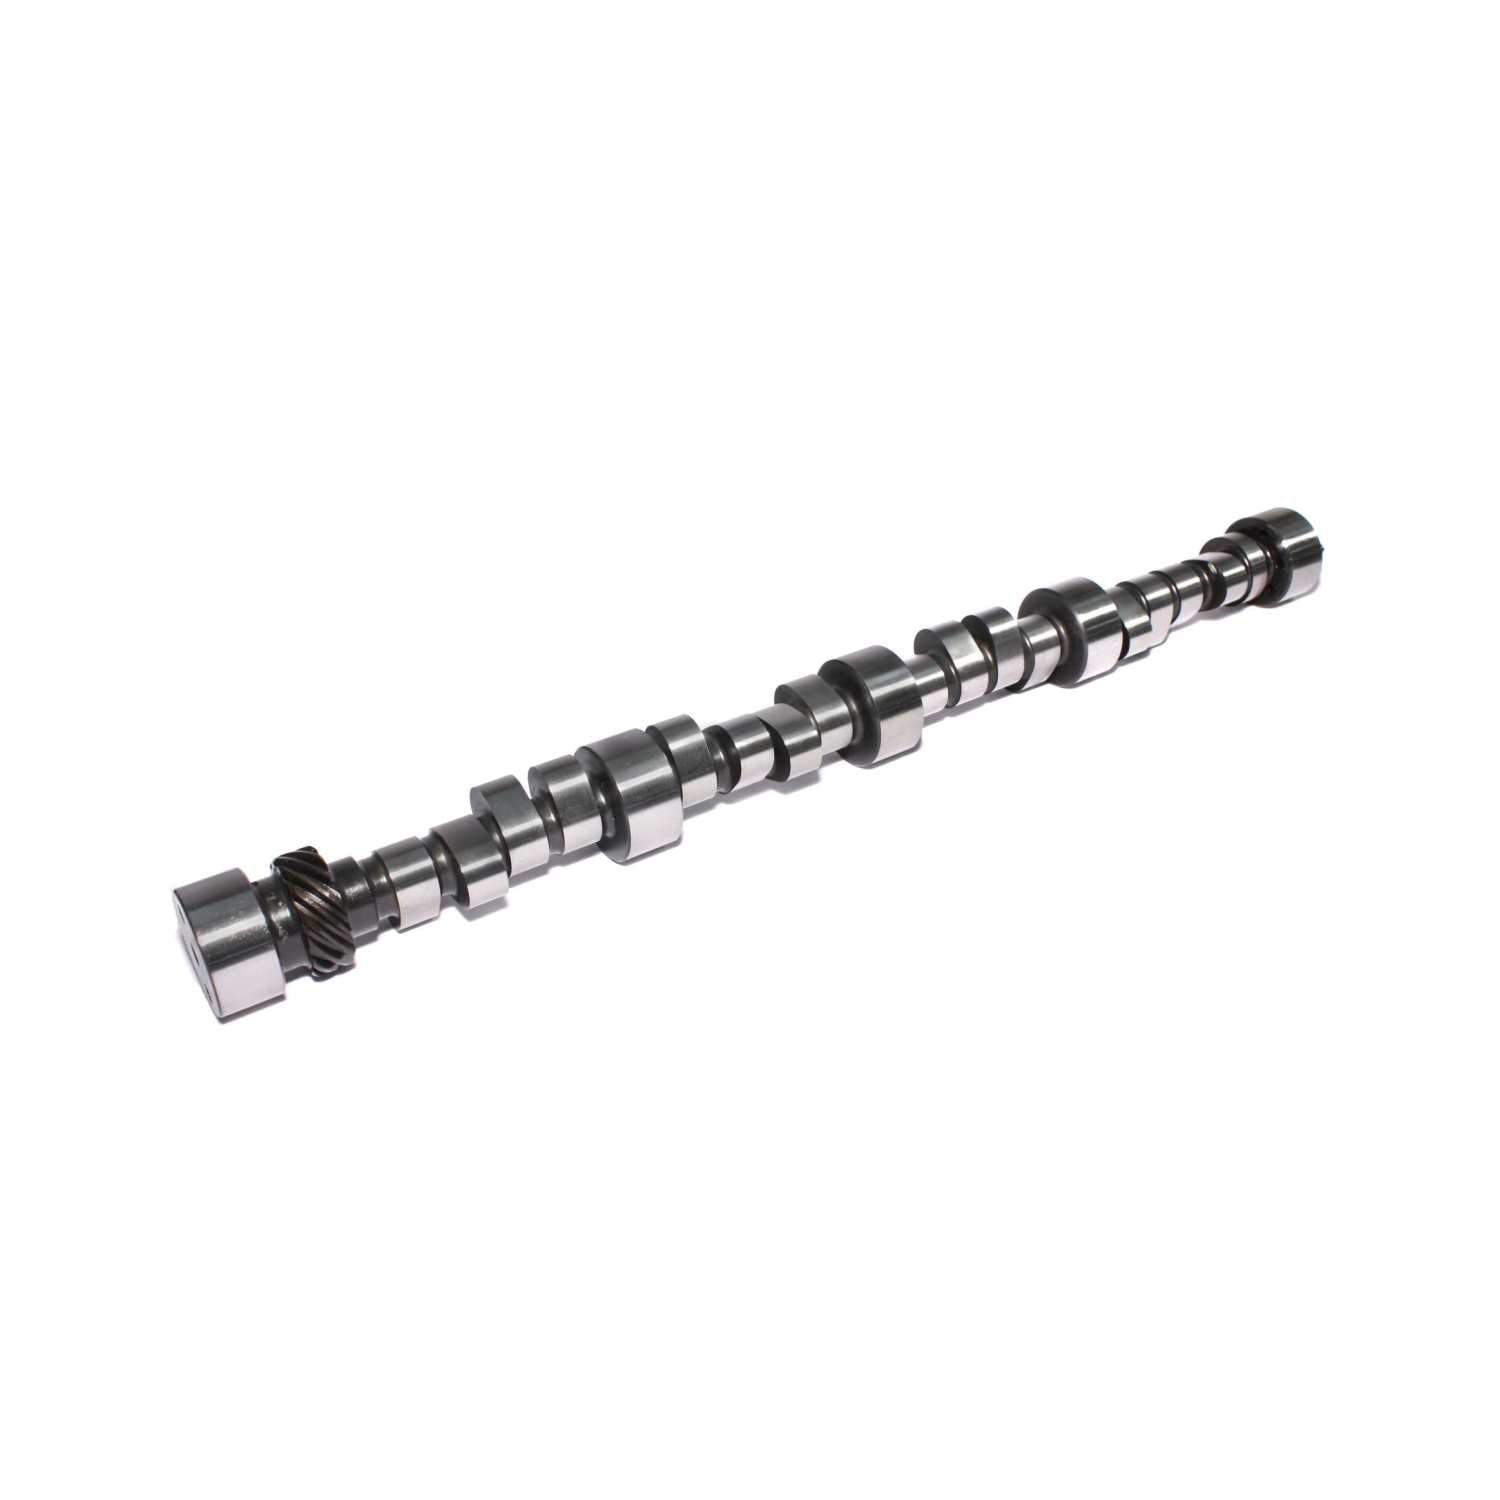 Competition Cams 11-732-9 Drag Race Camshaft